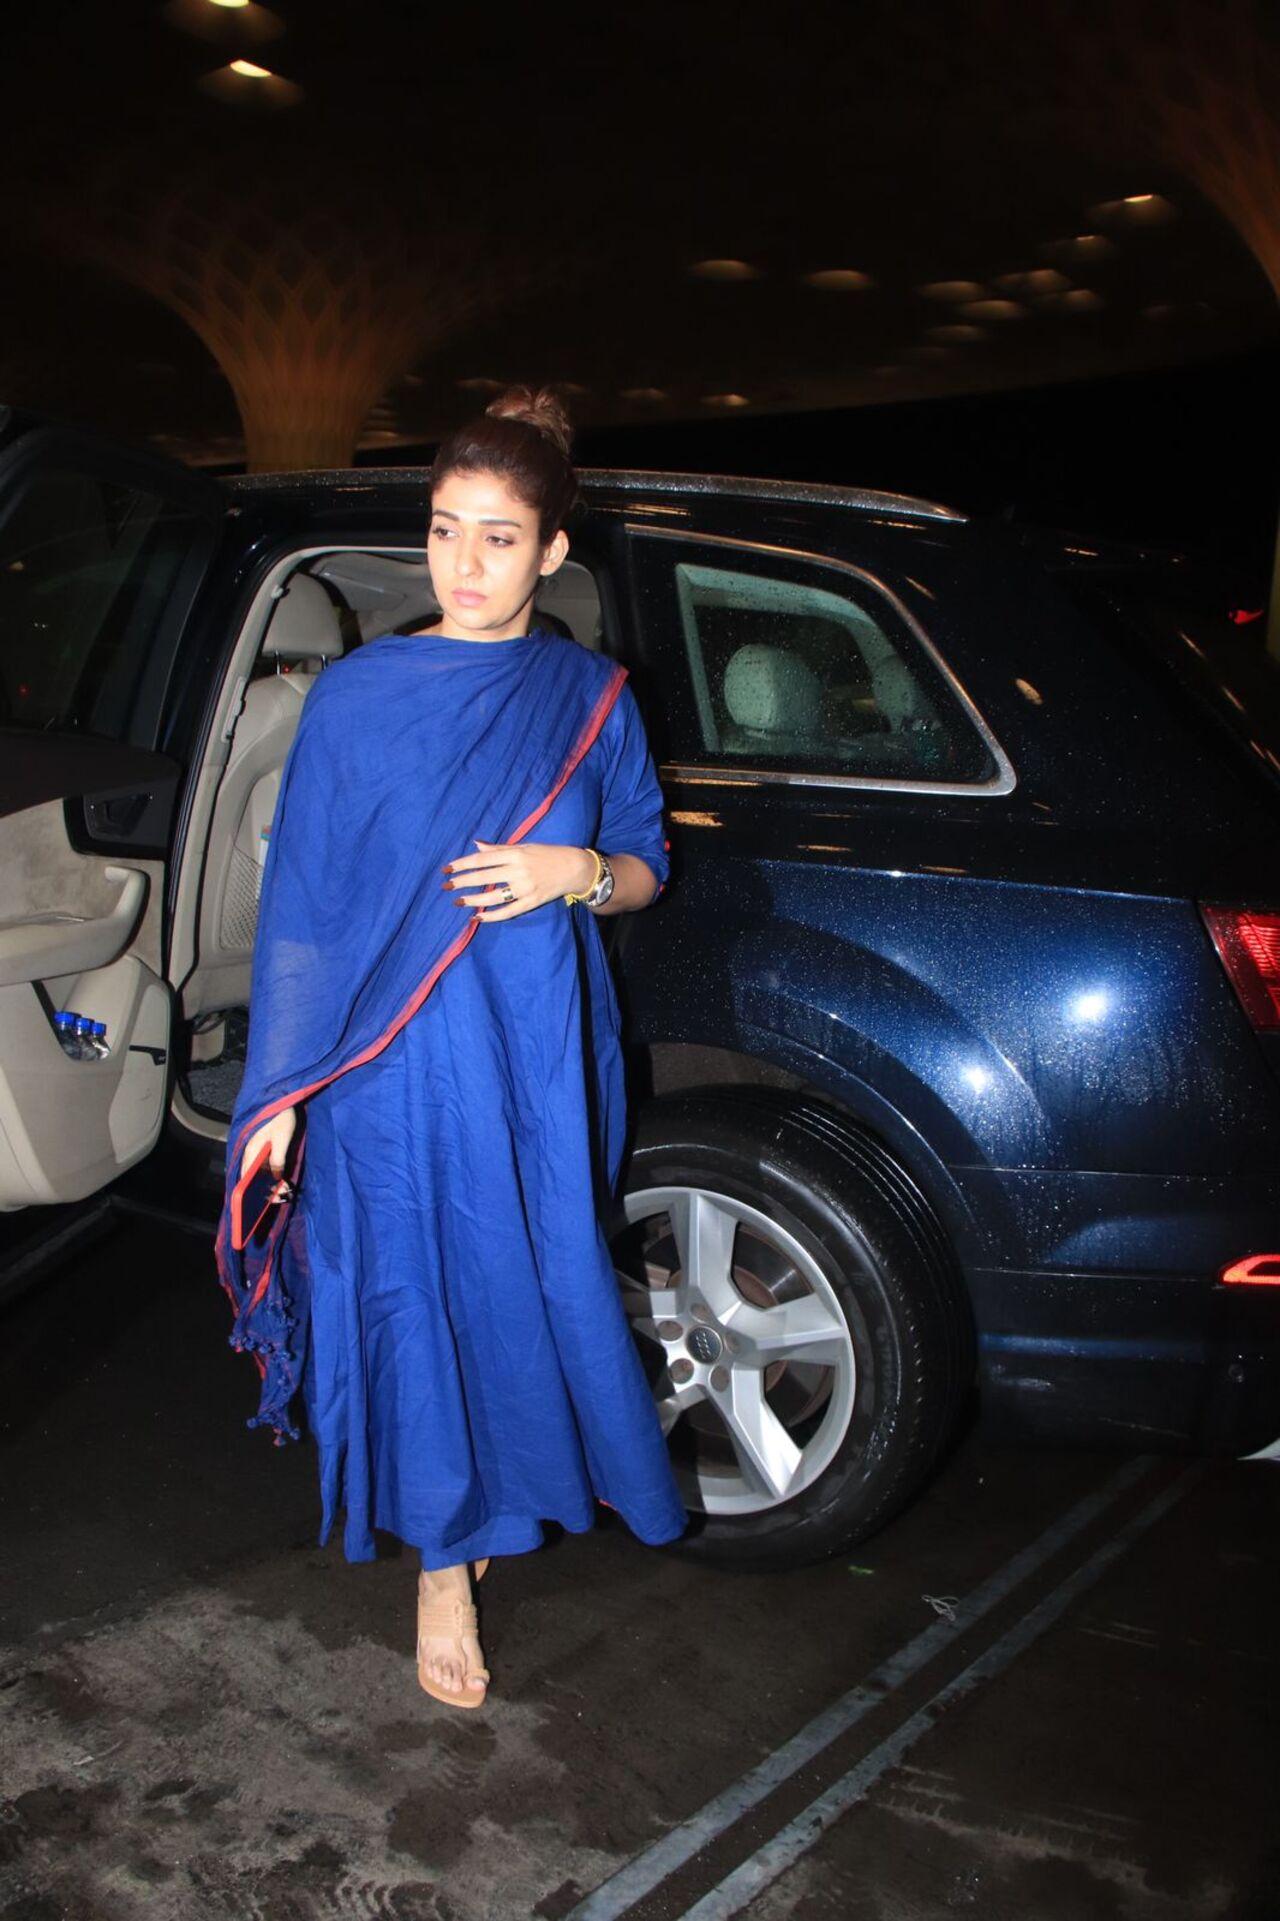 Jawan actress Nayanthara opted for a blue kurta set for her airport look